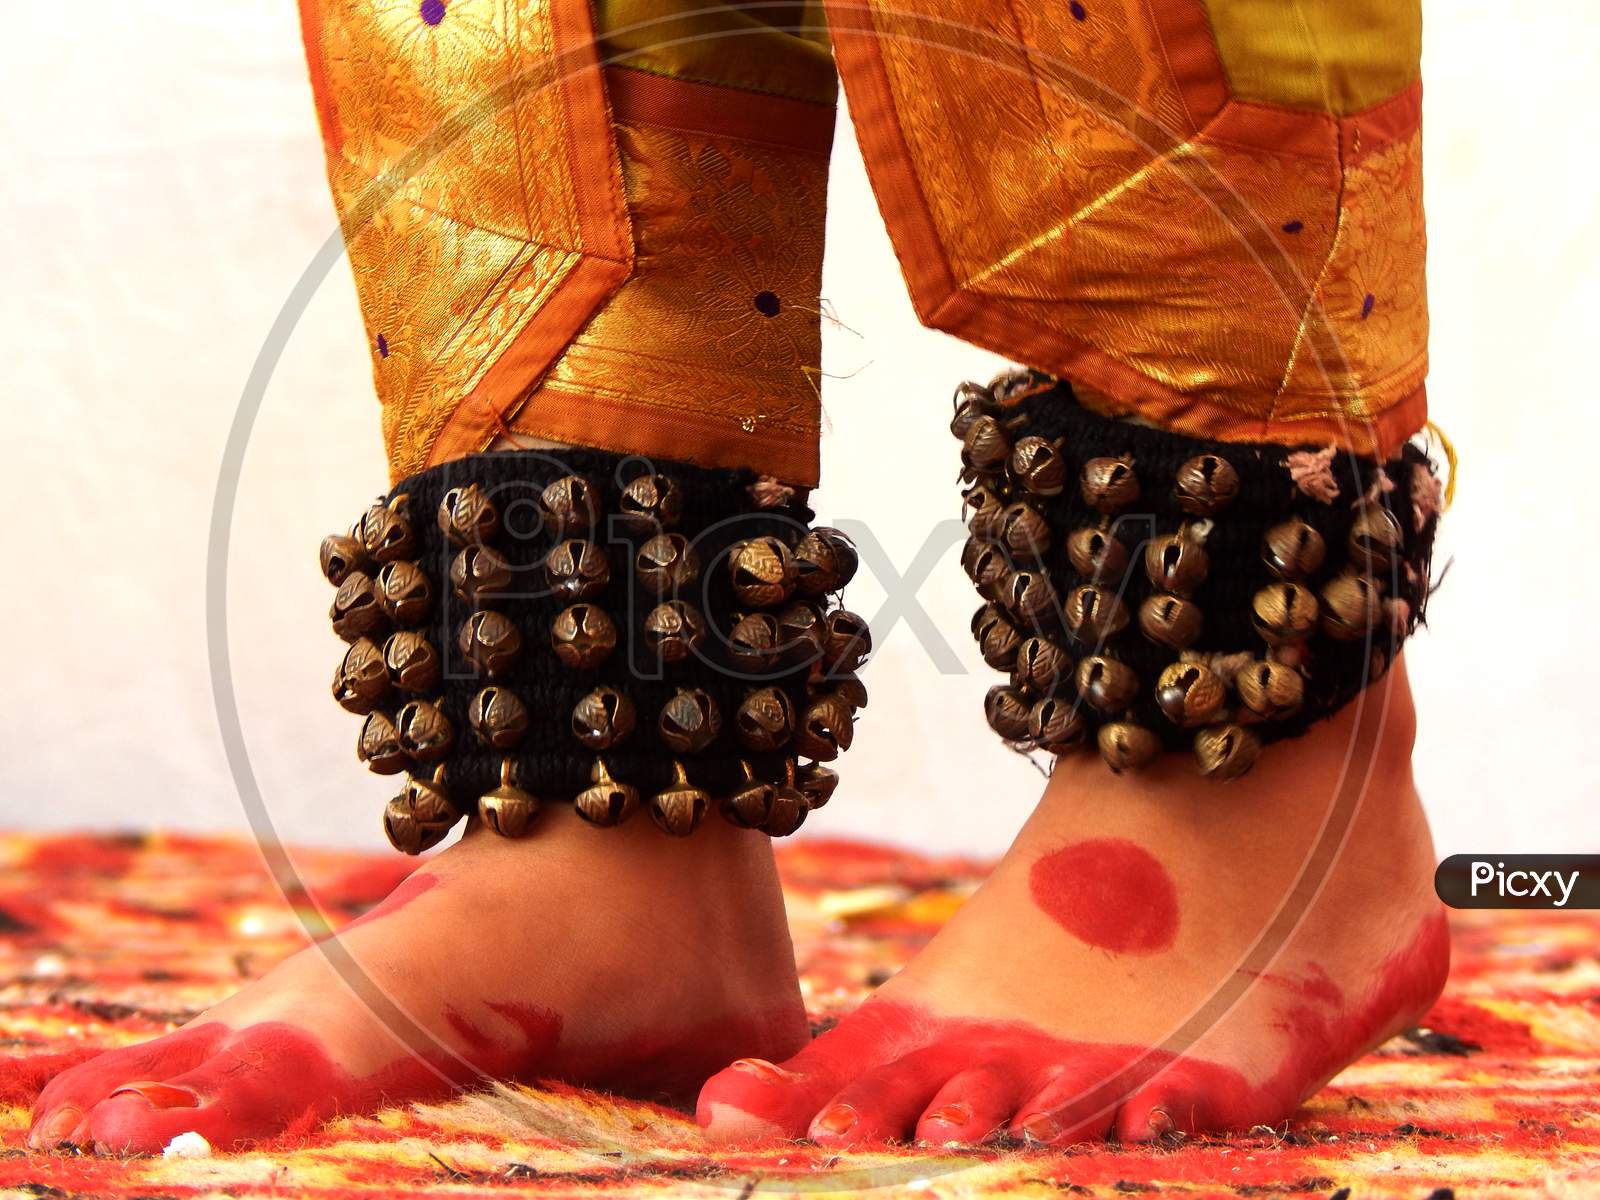 Foot of an Indian Classical Dancer with mehandi and ghungru.